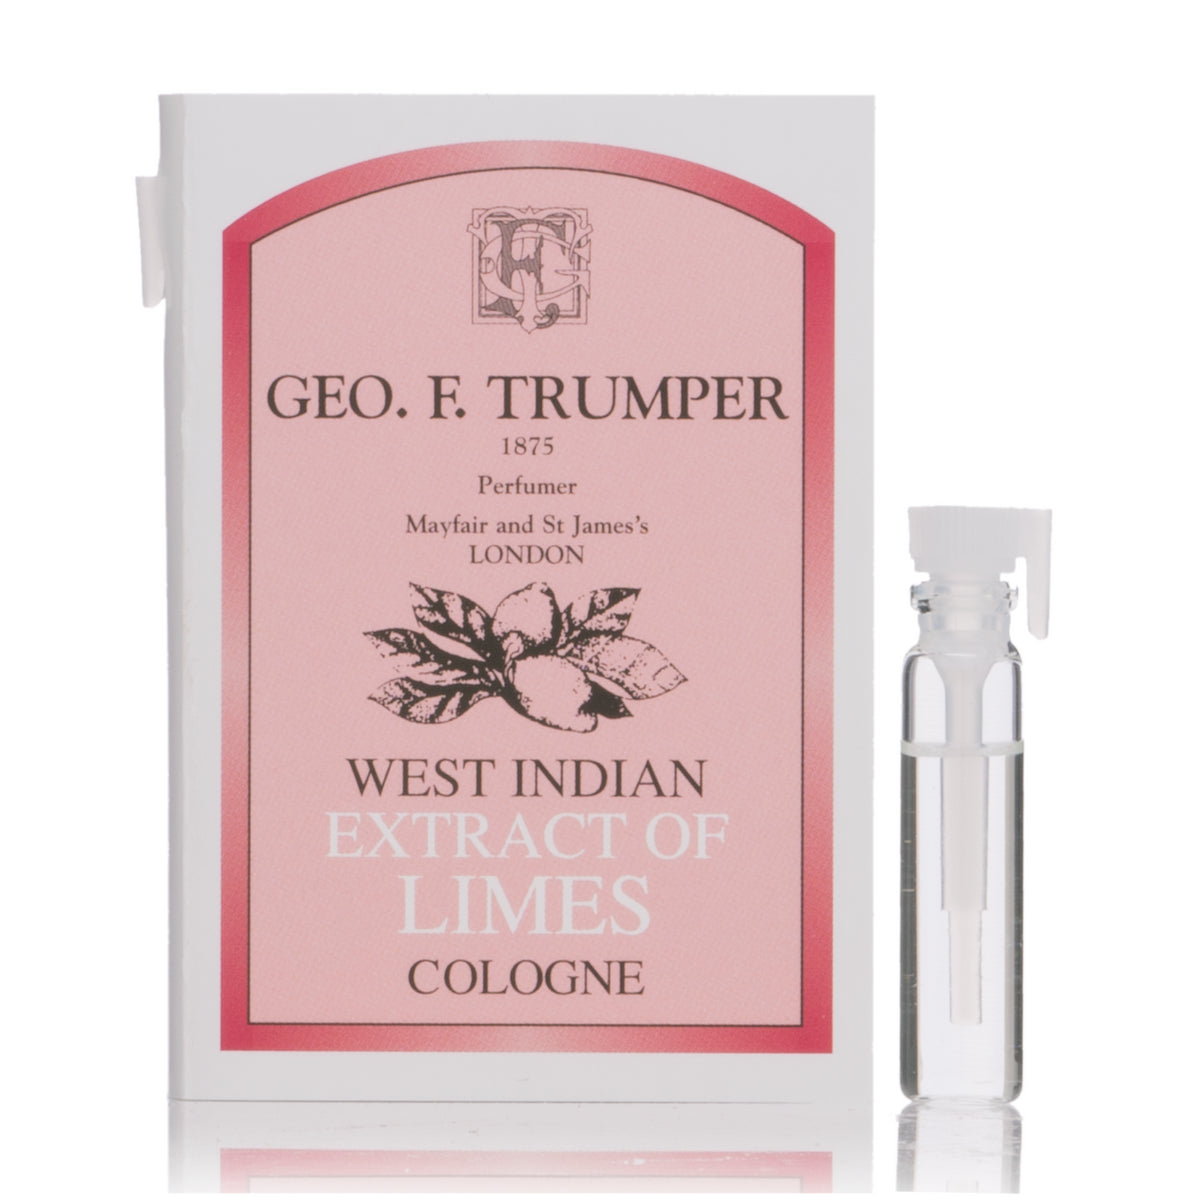 Geo F Trumper Extract of Limes Cologne, 200ml Travel Bottle